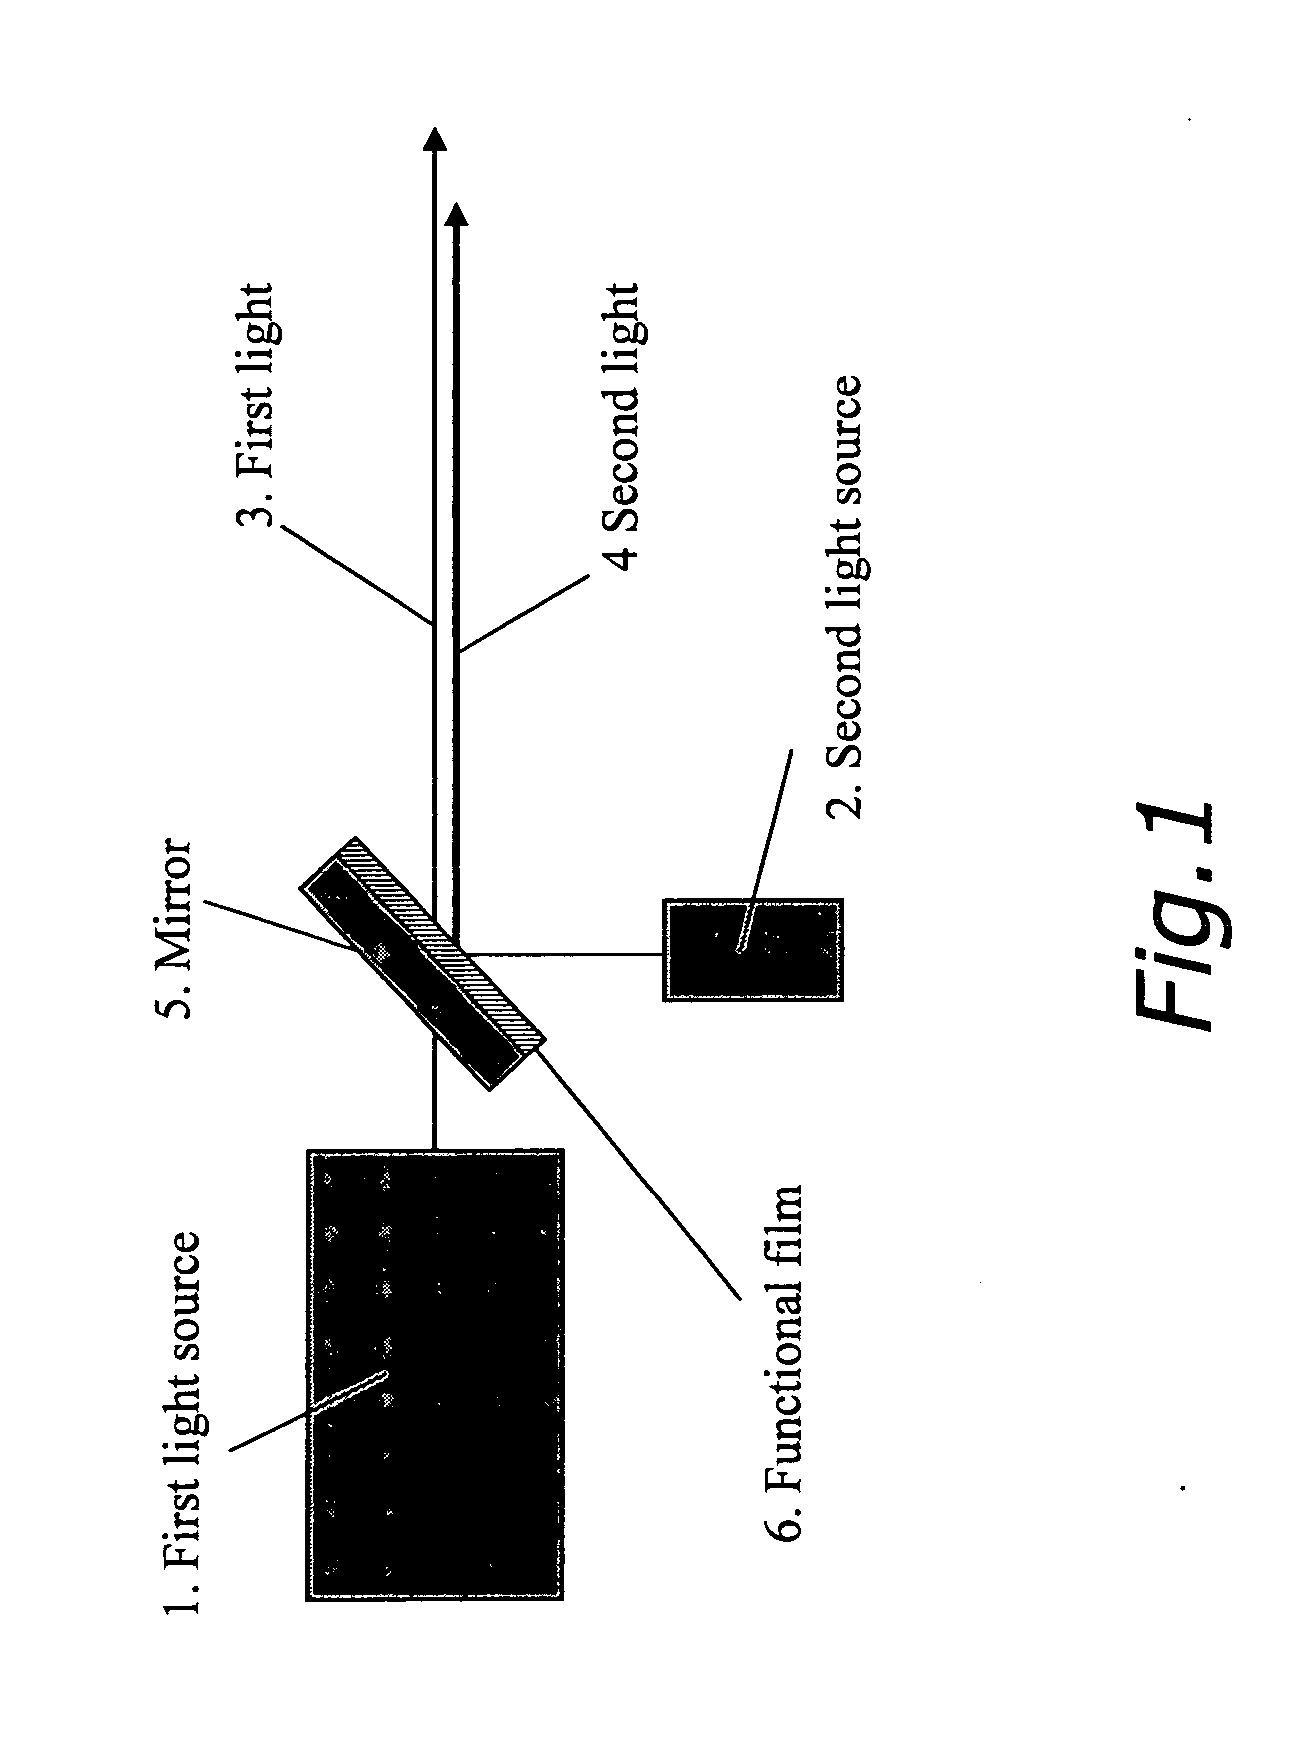 Coherent Light Source and Optical System